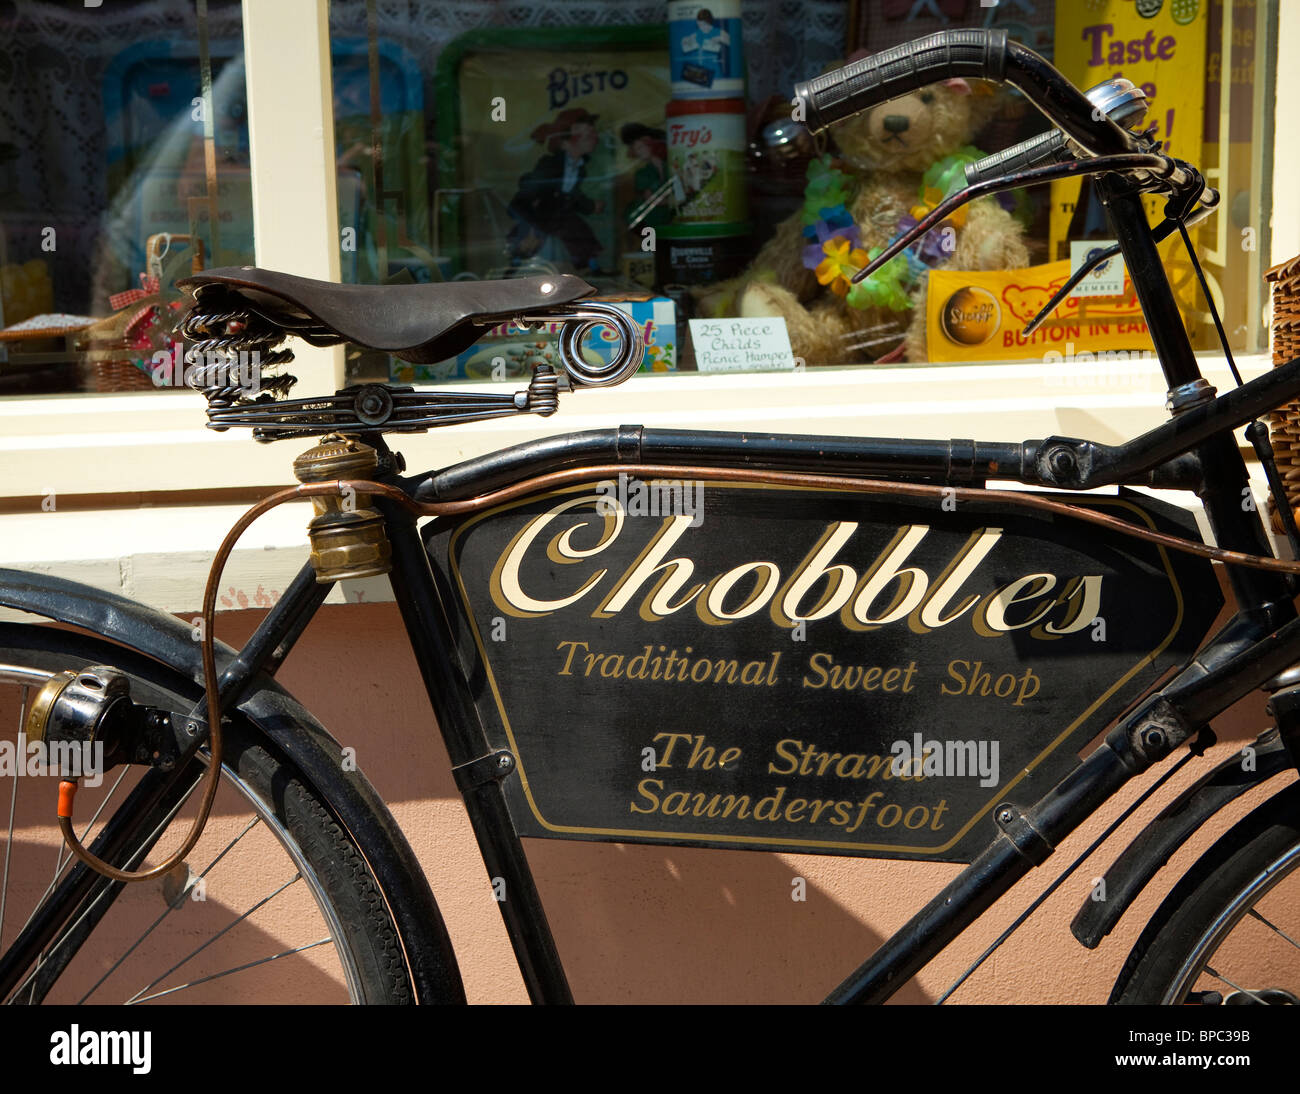 Chobbles Old Fashioned Sweet Shop, Saundersfoot Pembrokeshire, West Wales UK Banque D'Images